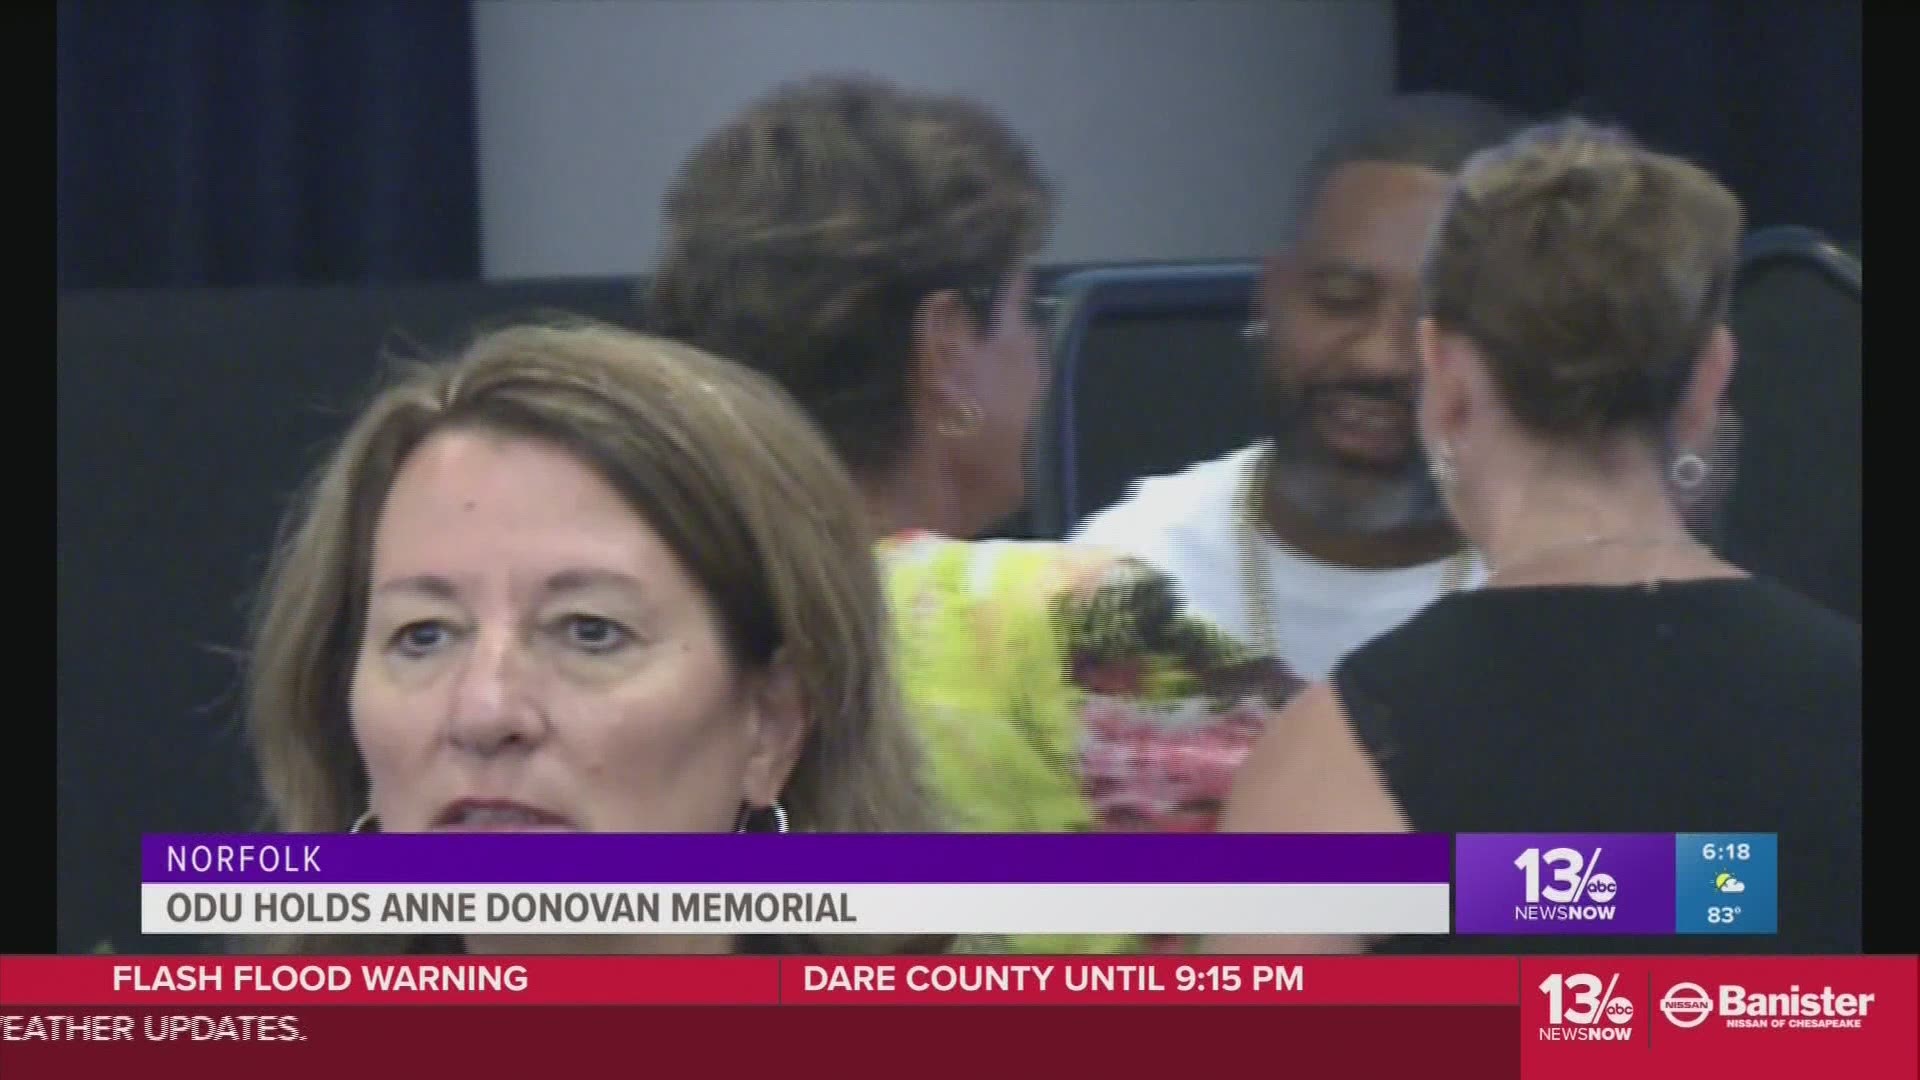 Basketball Hall of Famer, Anne Donovan was honored by friends, family and teammates at a memorial from Old Dominion University.